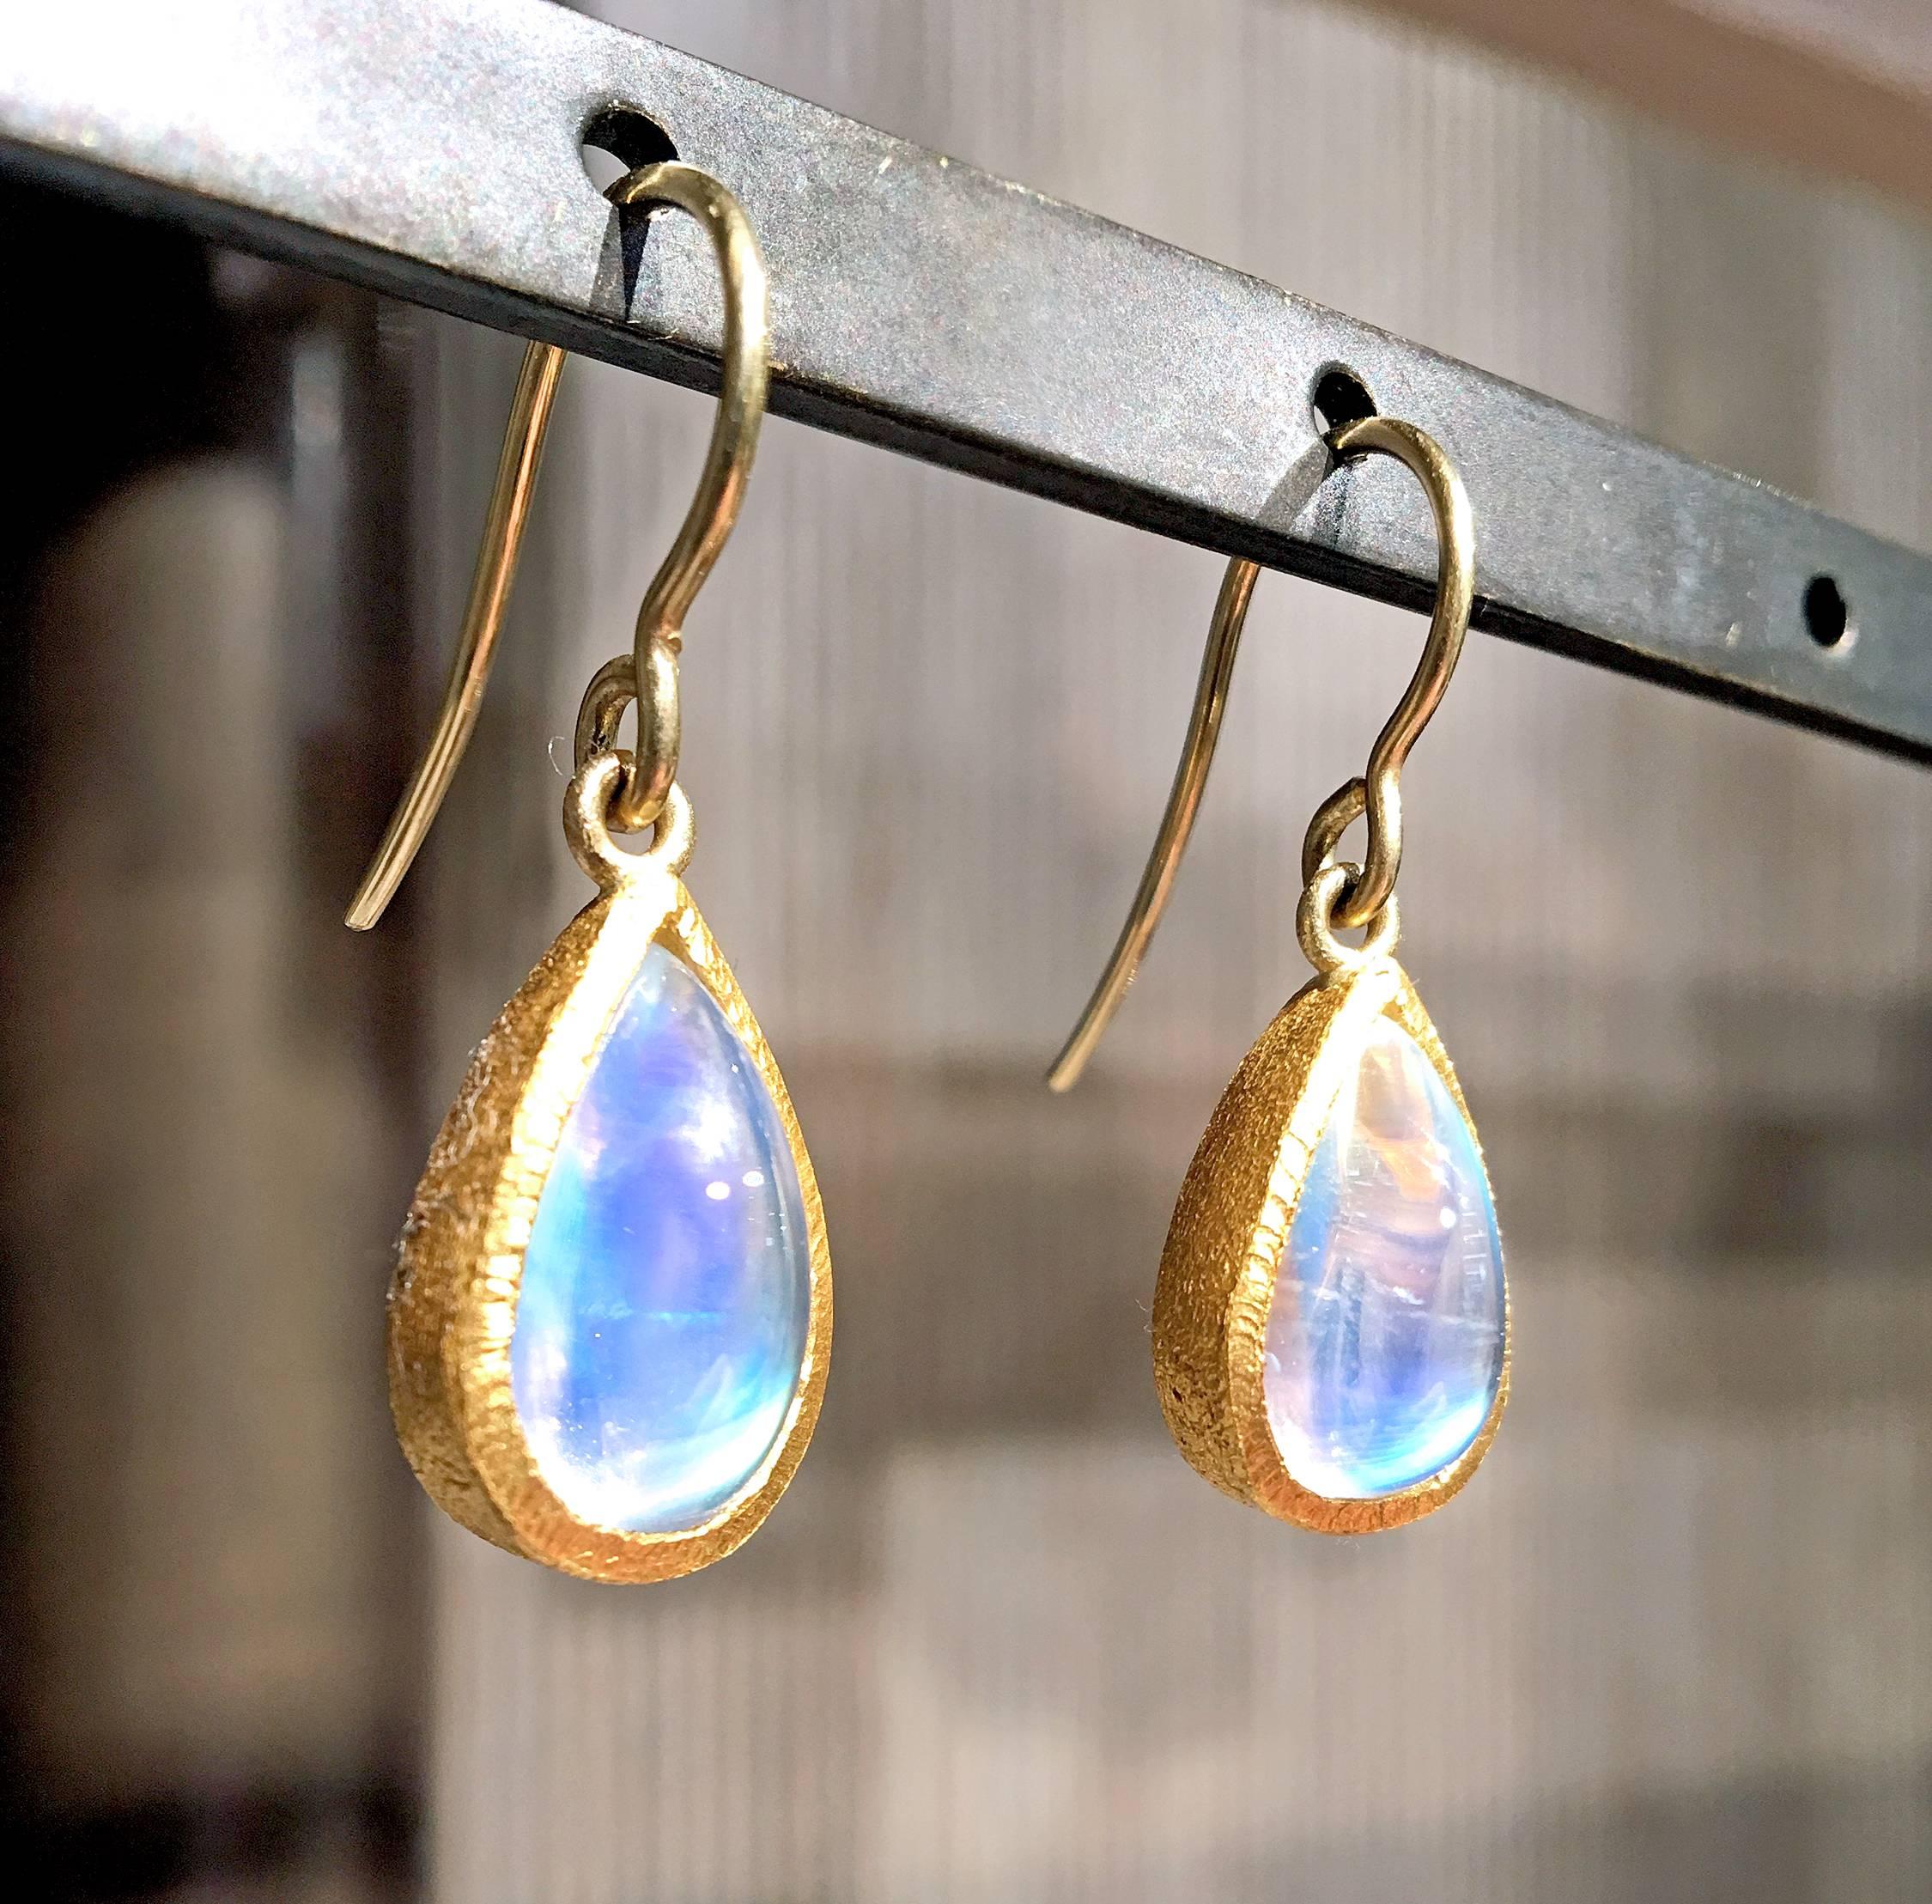 Dangle Drop Earrings handcrafted by jewelry designer Devta Doolan in his signature 22k yellow gold finish featuring a matched pair of superior quality rainbow moonstones with exceptional color and glow. On 18k gold wires. Stamped and Hallmarked 22k